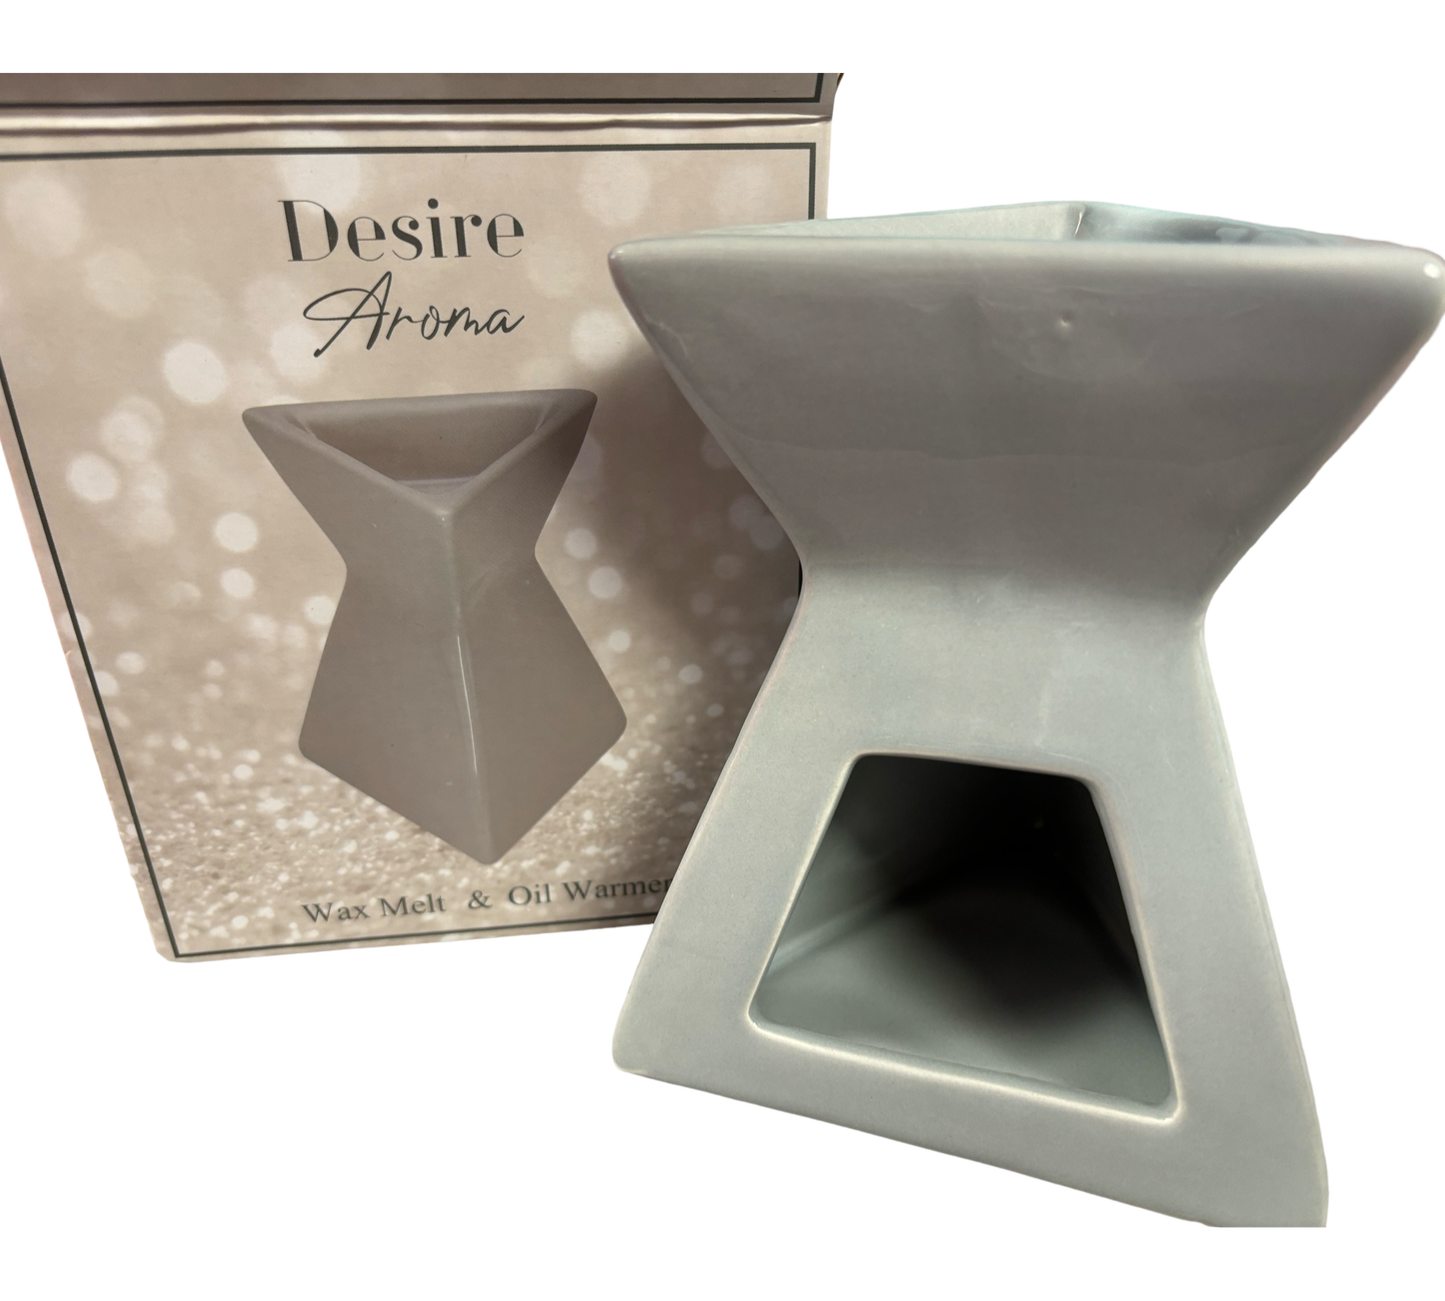 Triangle Grey Gloss Wax Melt & Oil Warmer by The Soap Gal x next to its box labeled "Desire Aroma." The warmer has a unique, angular design with a gray finish.